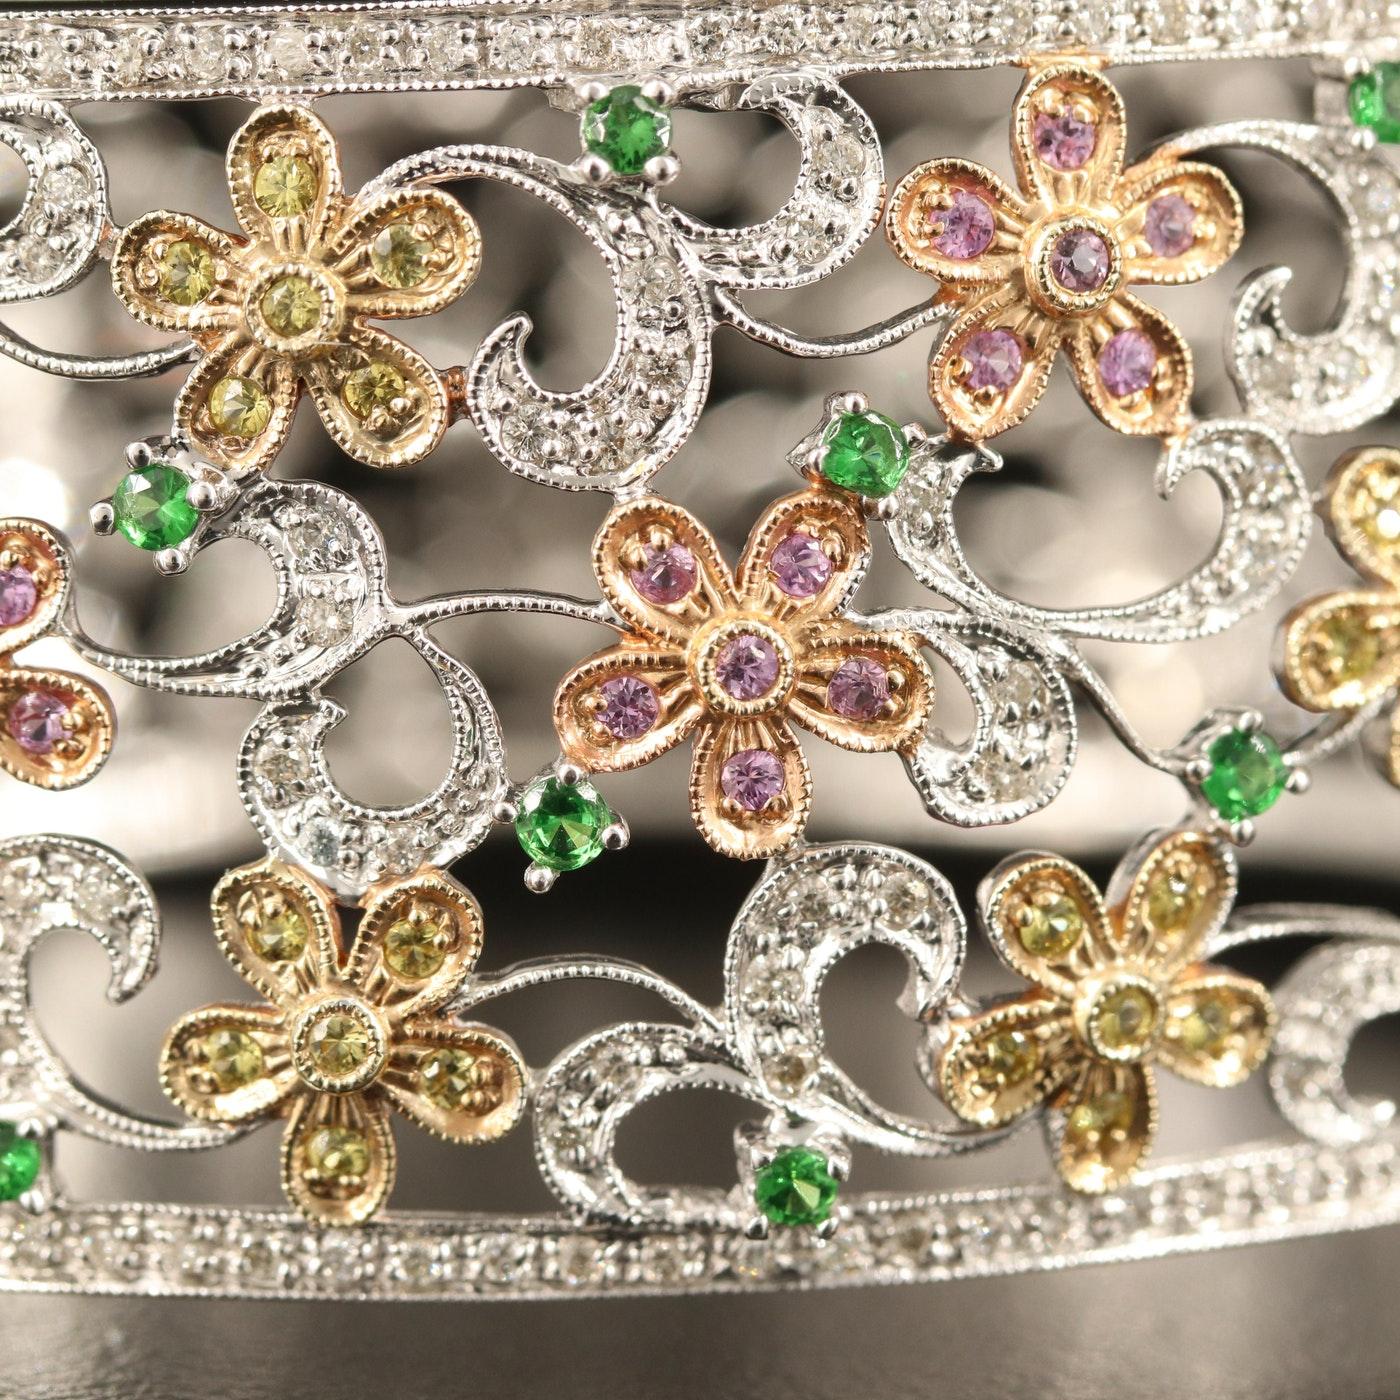 EFFY Bracelet, stamped with the designer hallmarks BH

Limited Edition, red carpet

Absolute luxury and quality

New with tags, Tag price $19750

4.55 CT high quality Round cut Diamond (SI / G) & AAA Sapphire (pink and yellow) and Tsavorite 

14K